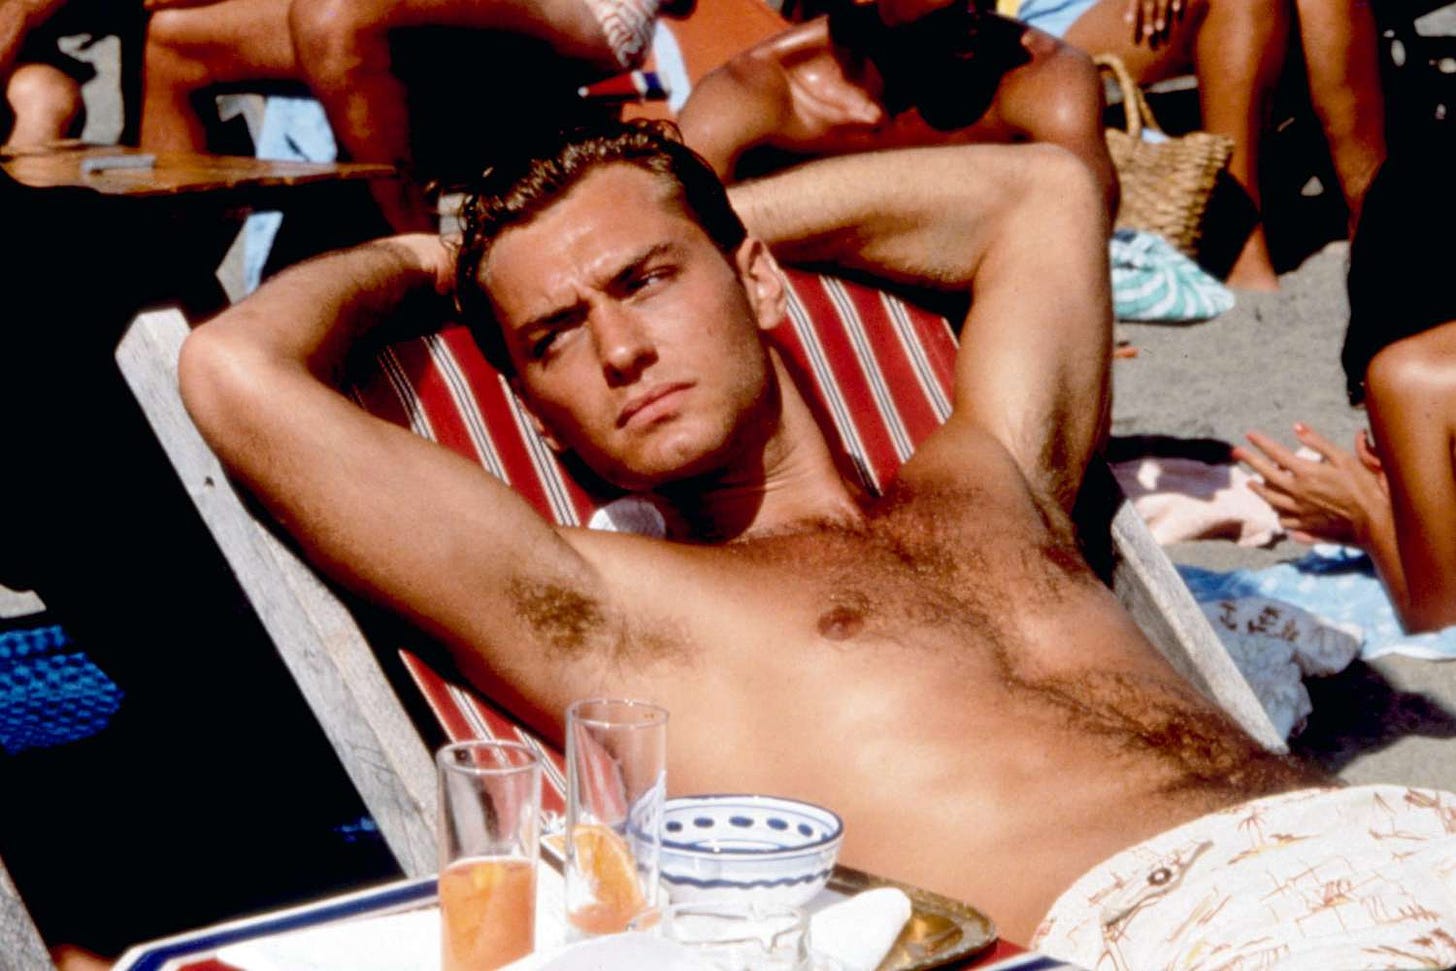 Jude Law characters: His hottest roles